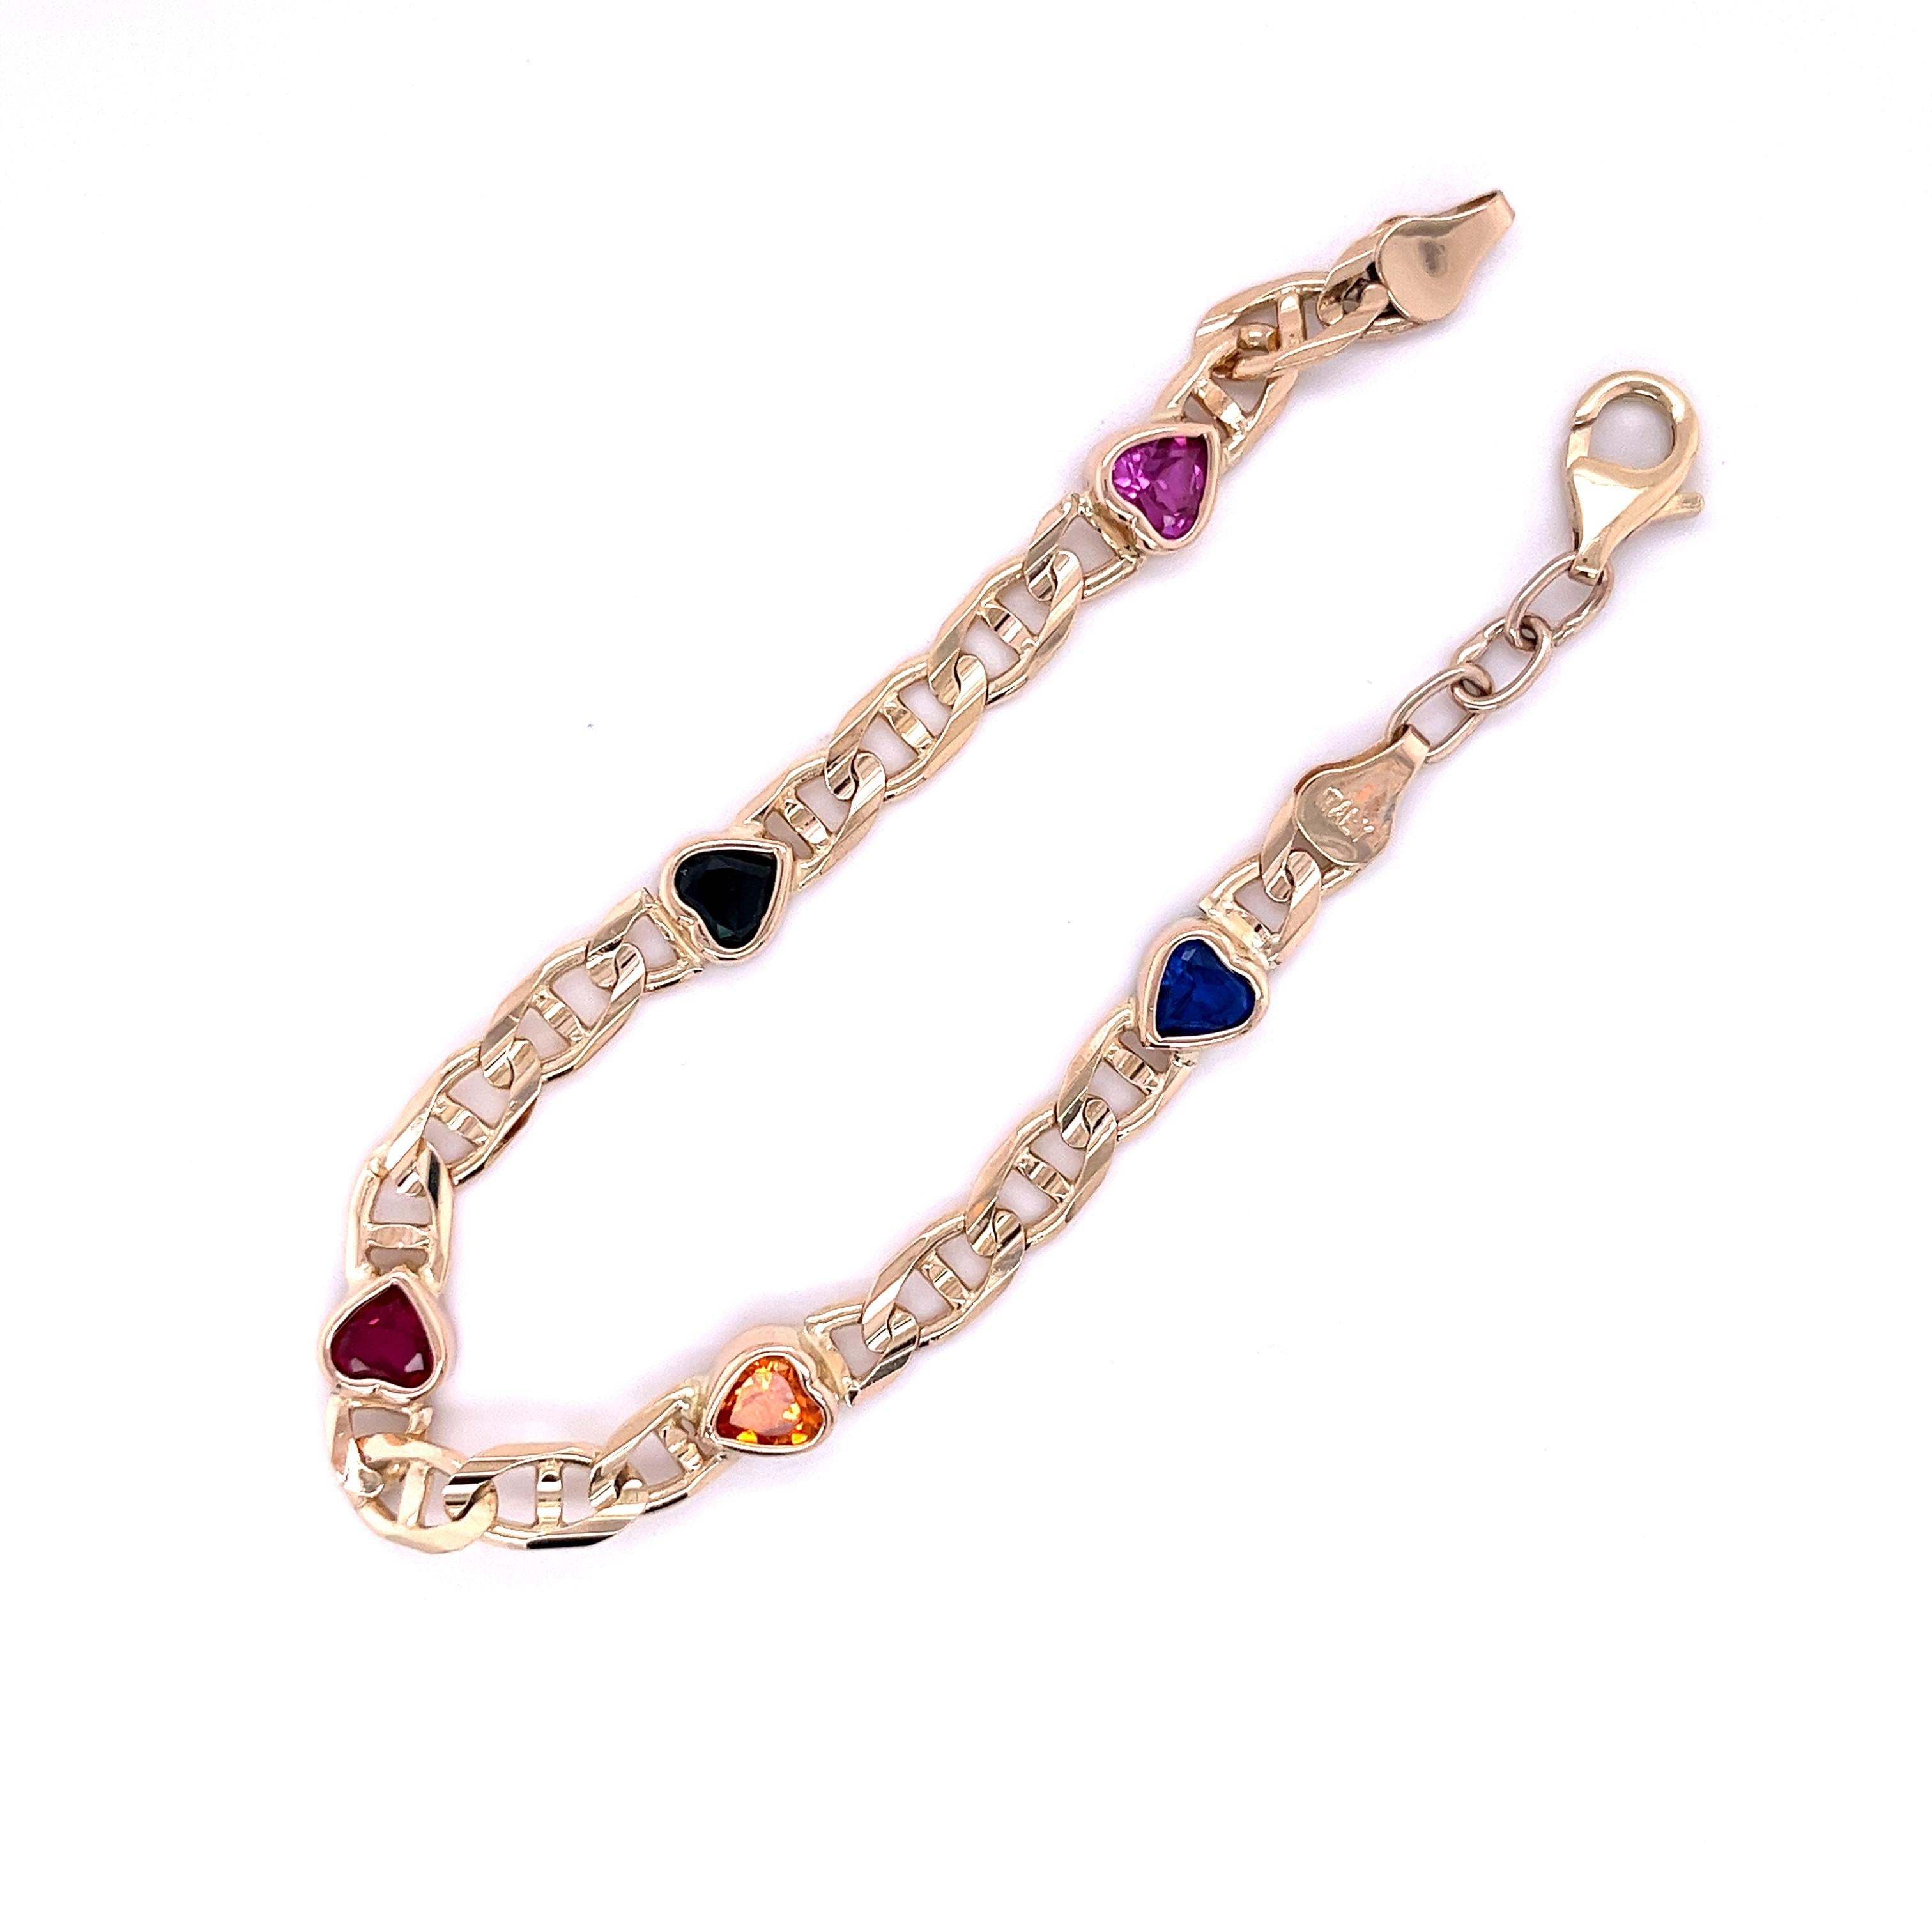 Heart-shaped multi-gemstone (Blue Sapphire, Pink Sapphire, Ruby, Peridot, and Citrine) charm bracelet with lobster closure. Set in 14K Yellow Gold, this charming bracelet captures all the colors of love and friendship. Made in Italy. 

This bracelet